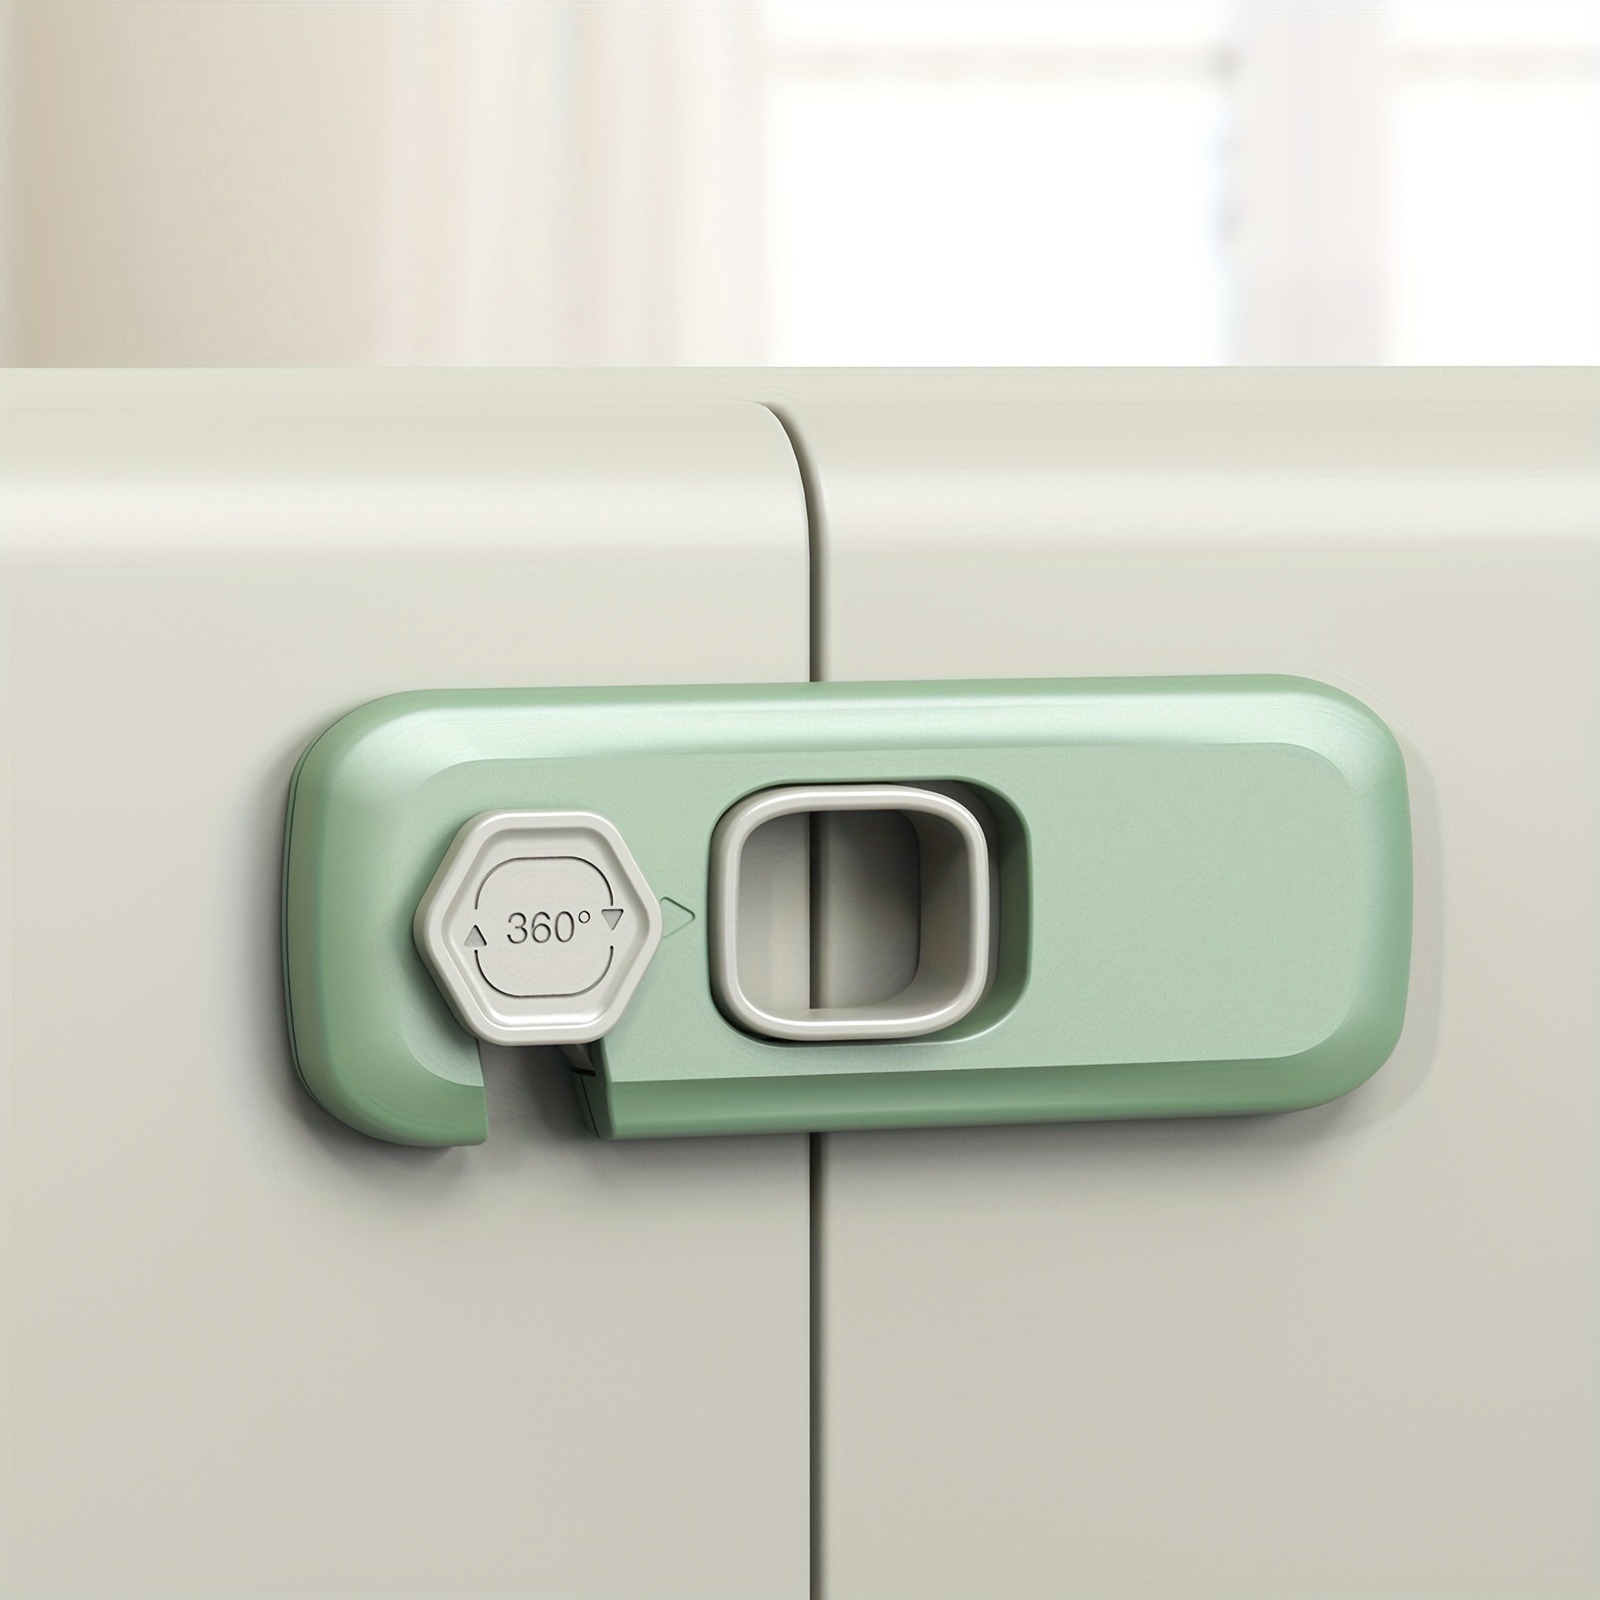 Child Safety Cabinet Locks – The Baby Lodge